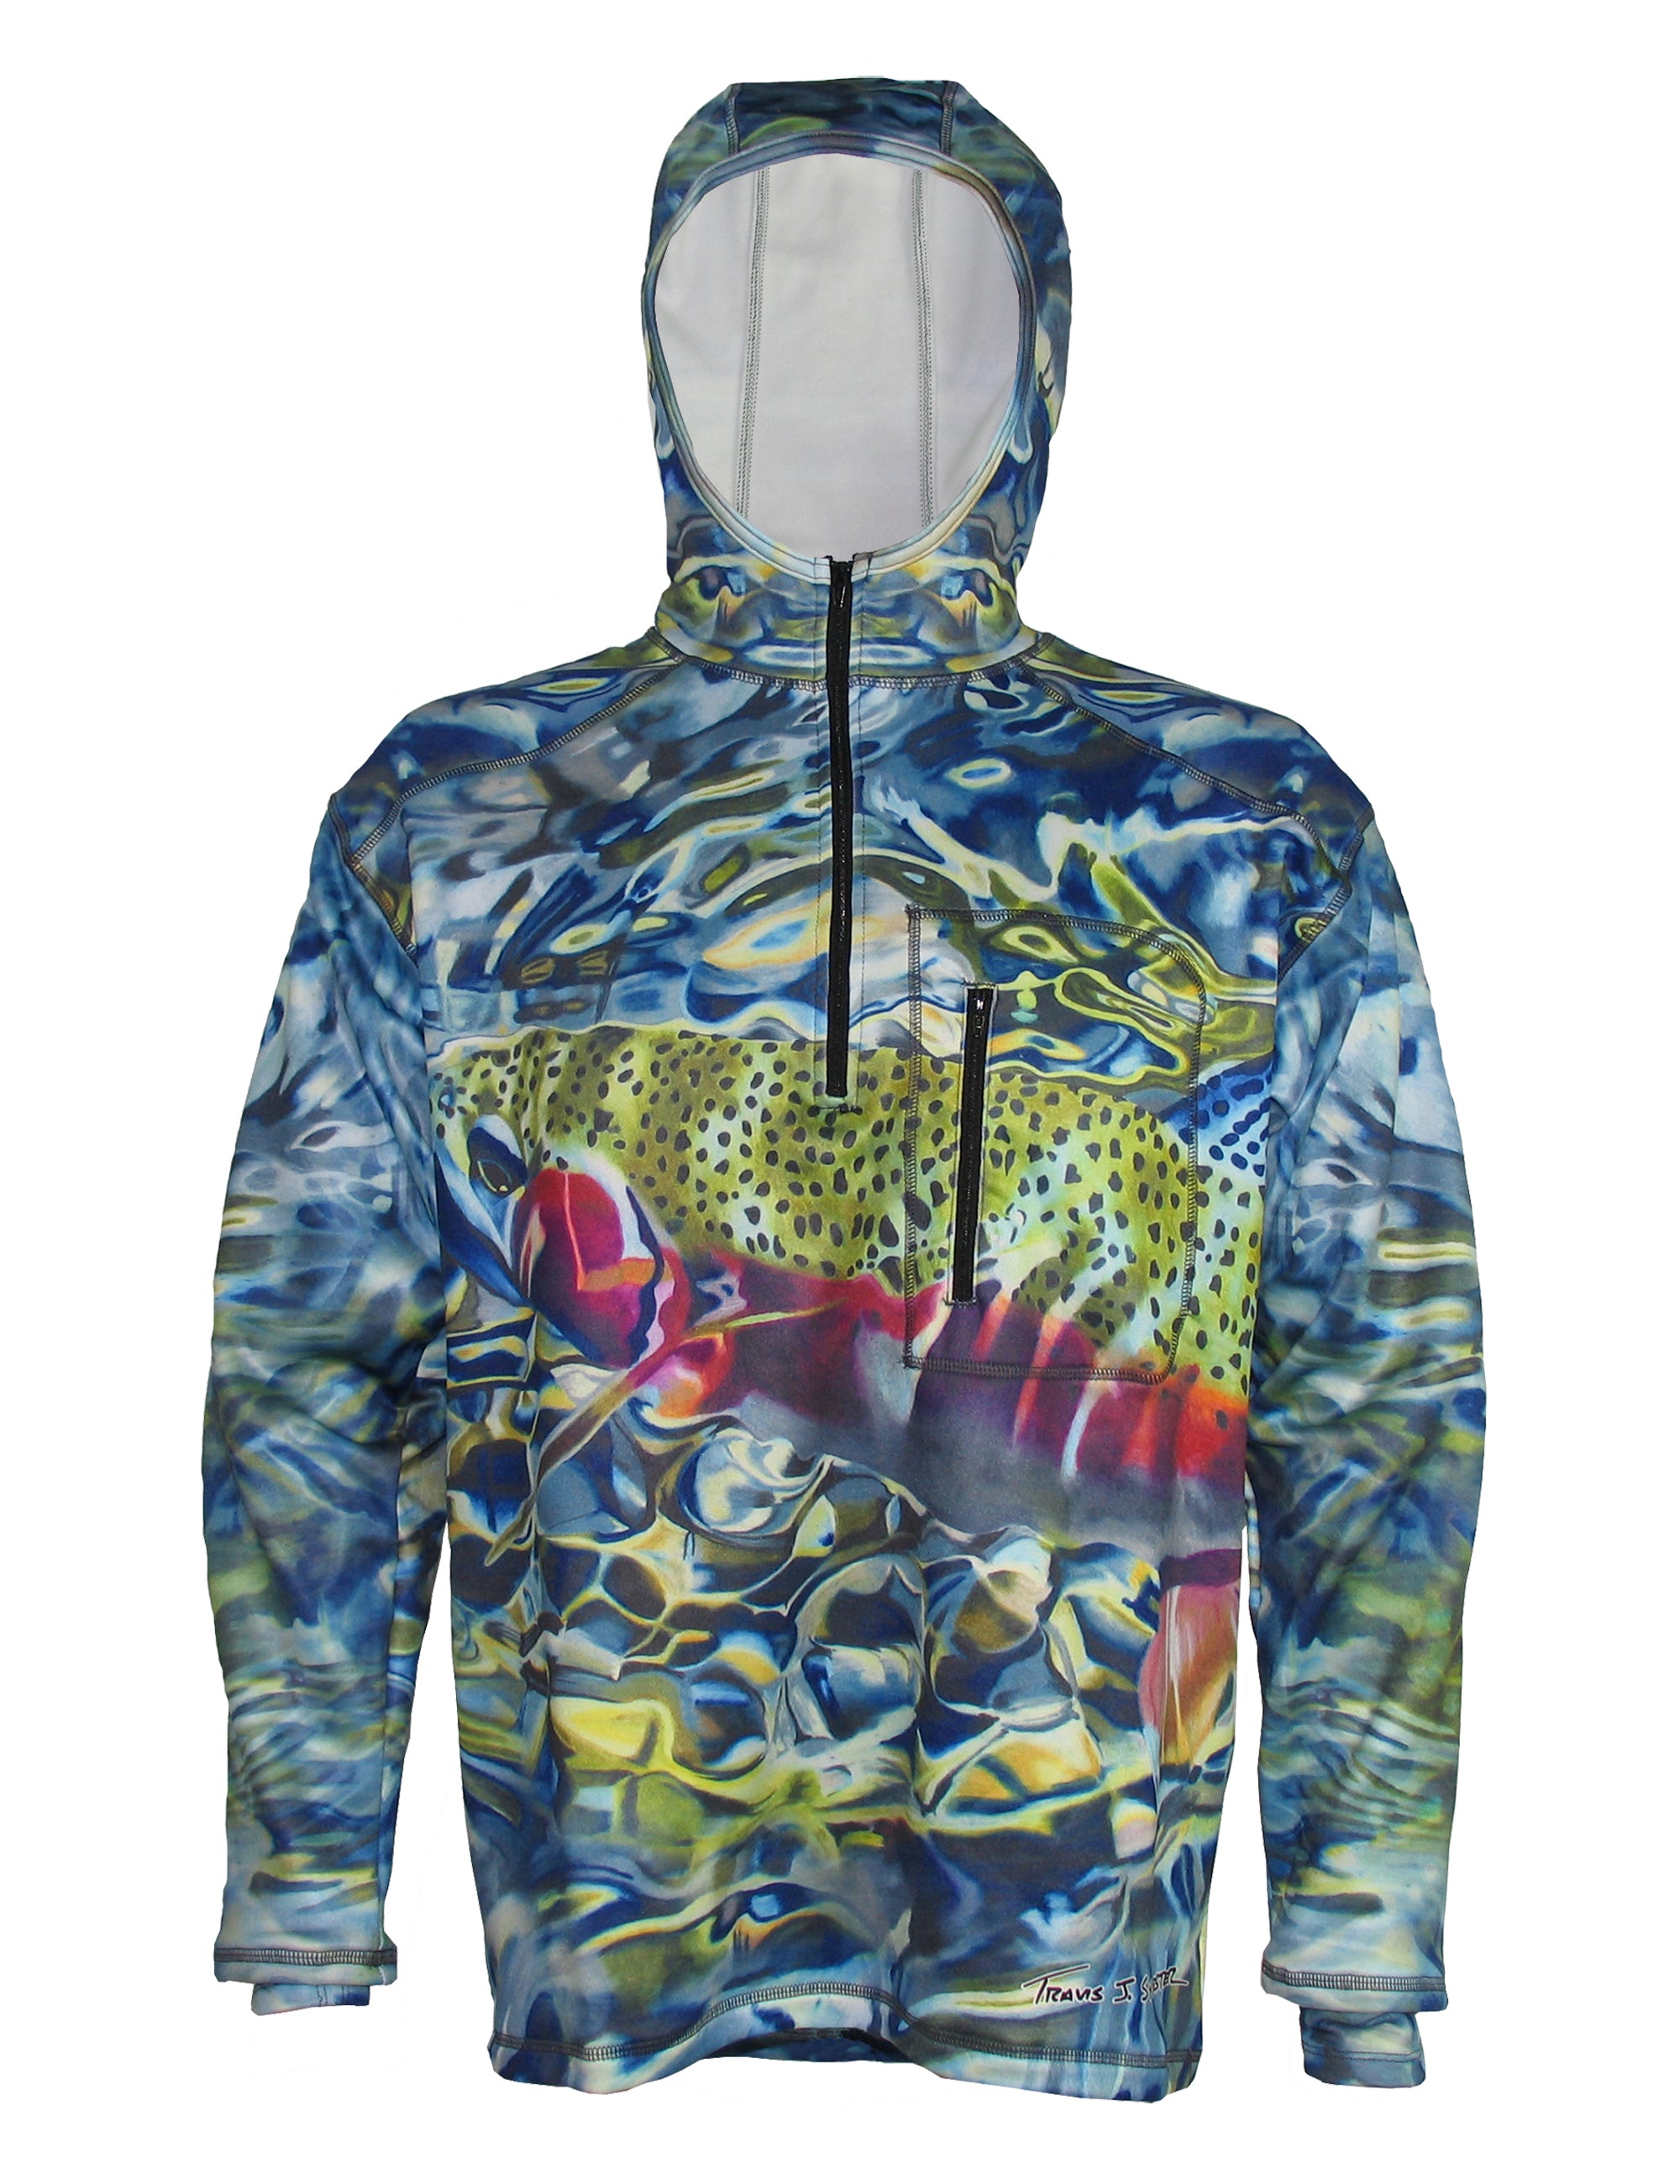 Fincognito Flexshell Hoodie 1/4-Zip Tranquility Fish Print Fly Fishing